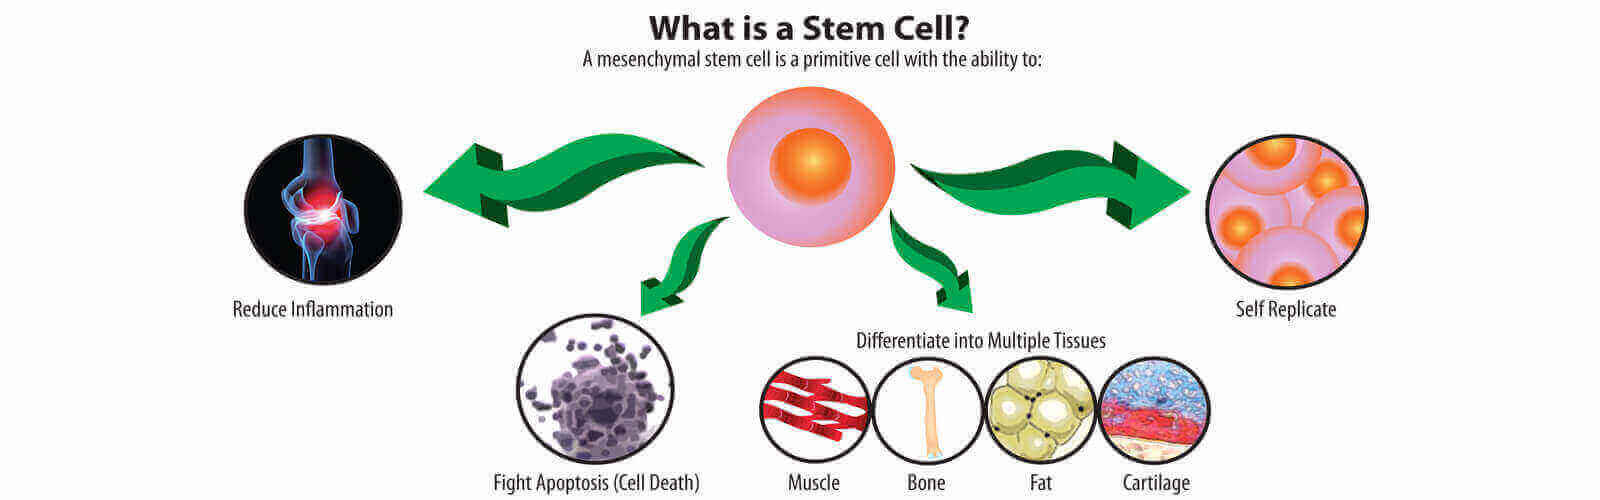 Stem Cell Treatment in Oman